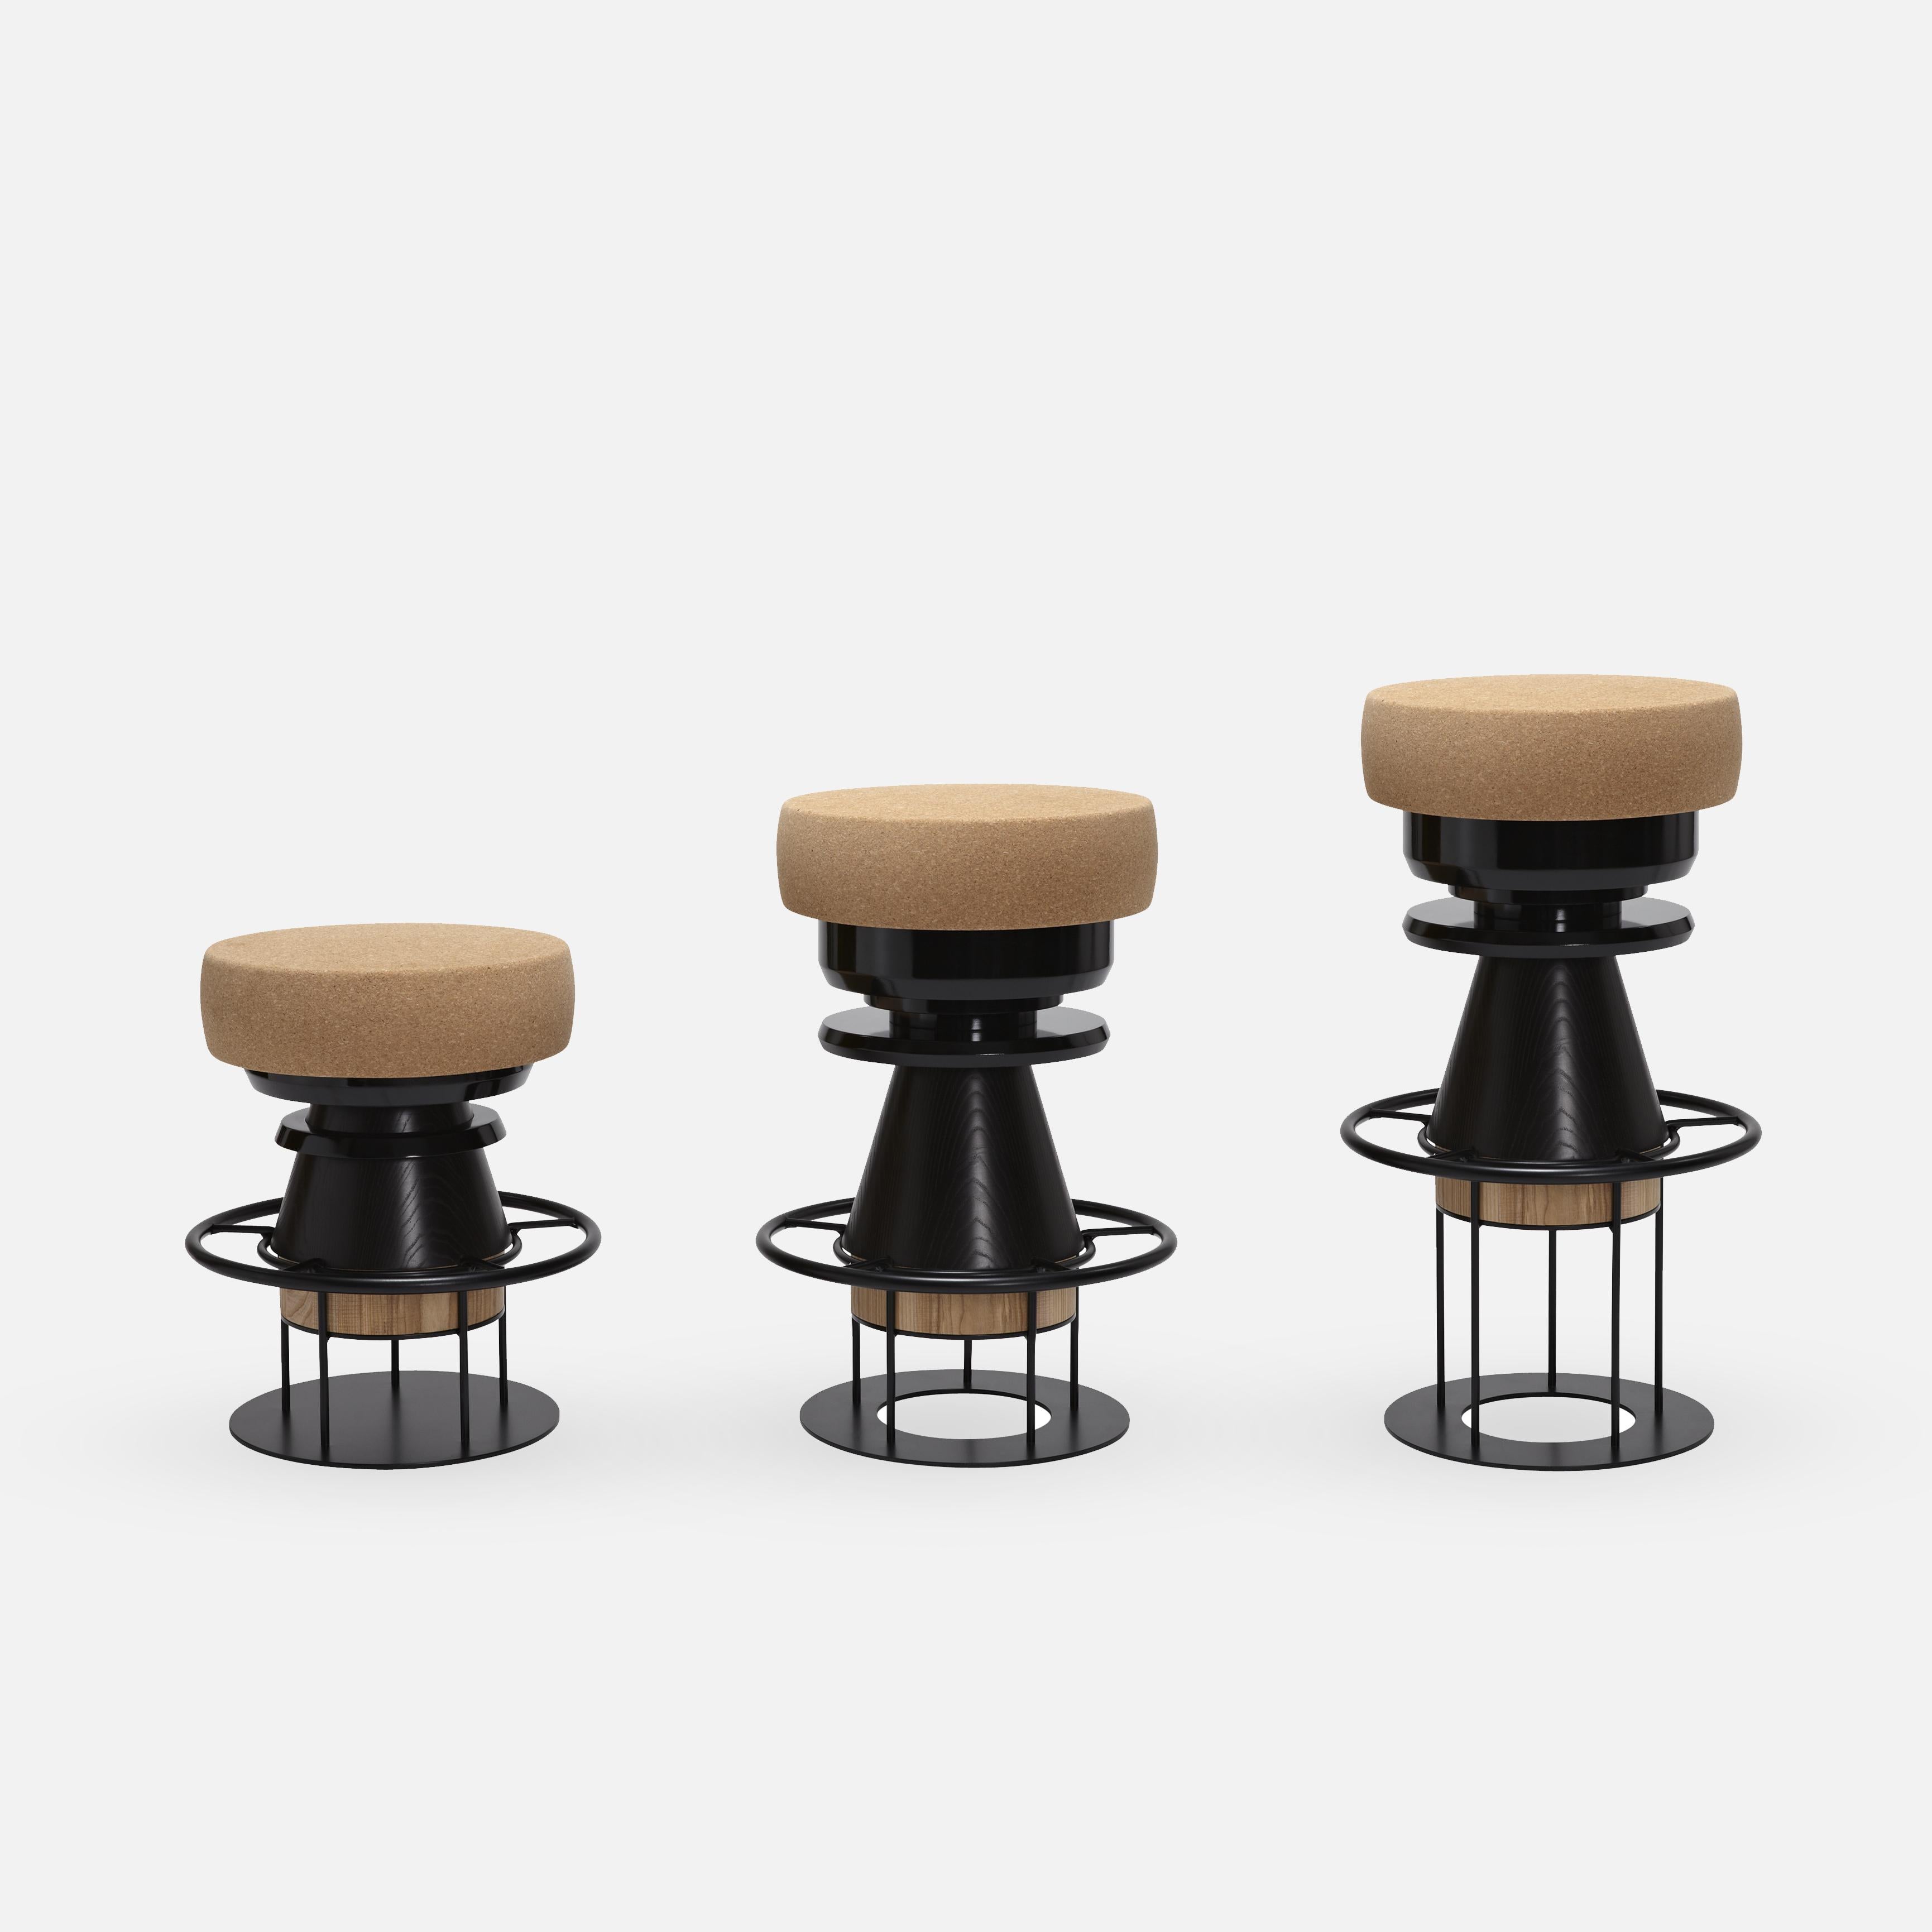 Tembo is a sculptural stool that combines a wood metal body with a solid cork seat. The designers drew their inspiration both from the African tam-tams -Tembo means elephant coot in swahili- and give a nod to the Memphis group of the 80s